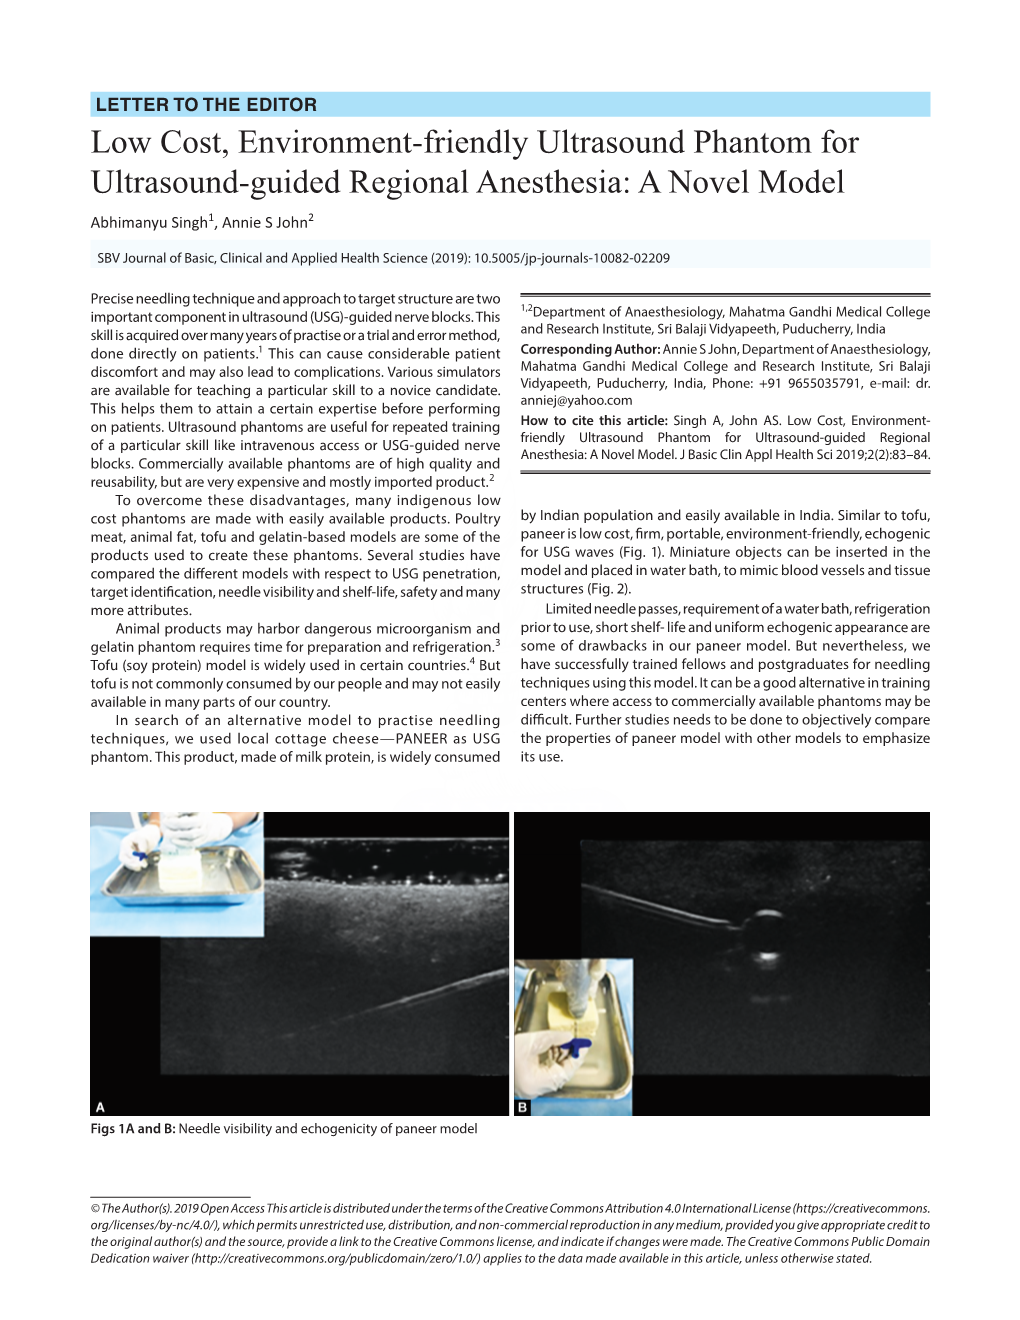 Low Cost, Environment-Friendly Ultrasound Phantom for Ultrasound-Guided Regional Anesthesia: a Novel Model Abhimanyu Singh1, Annie S John2